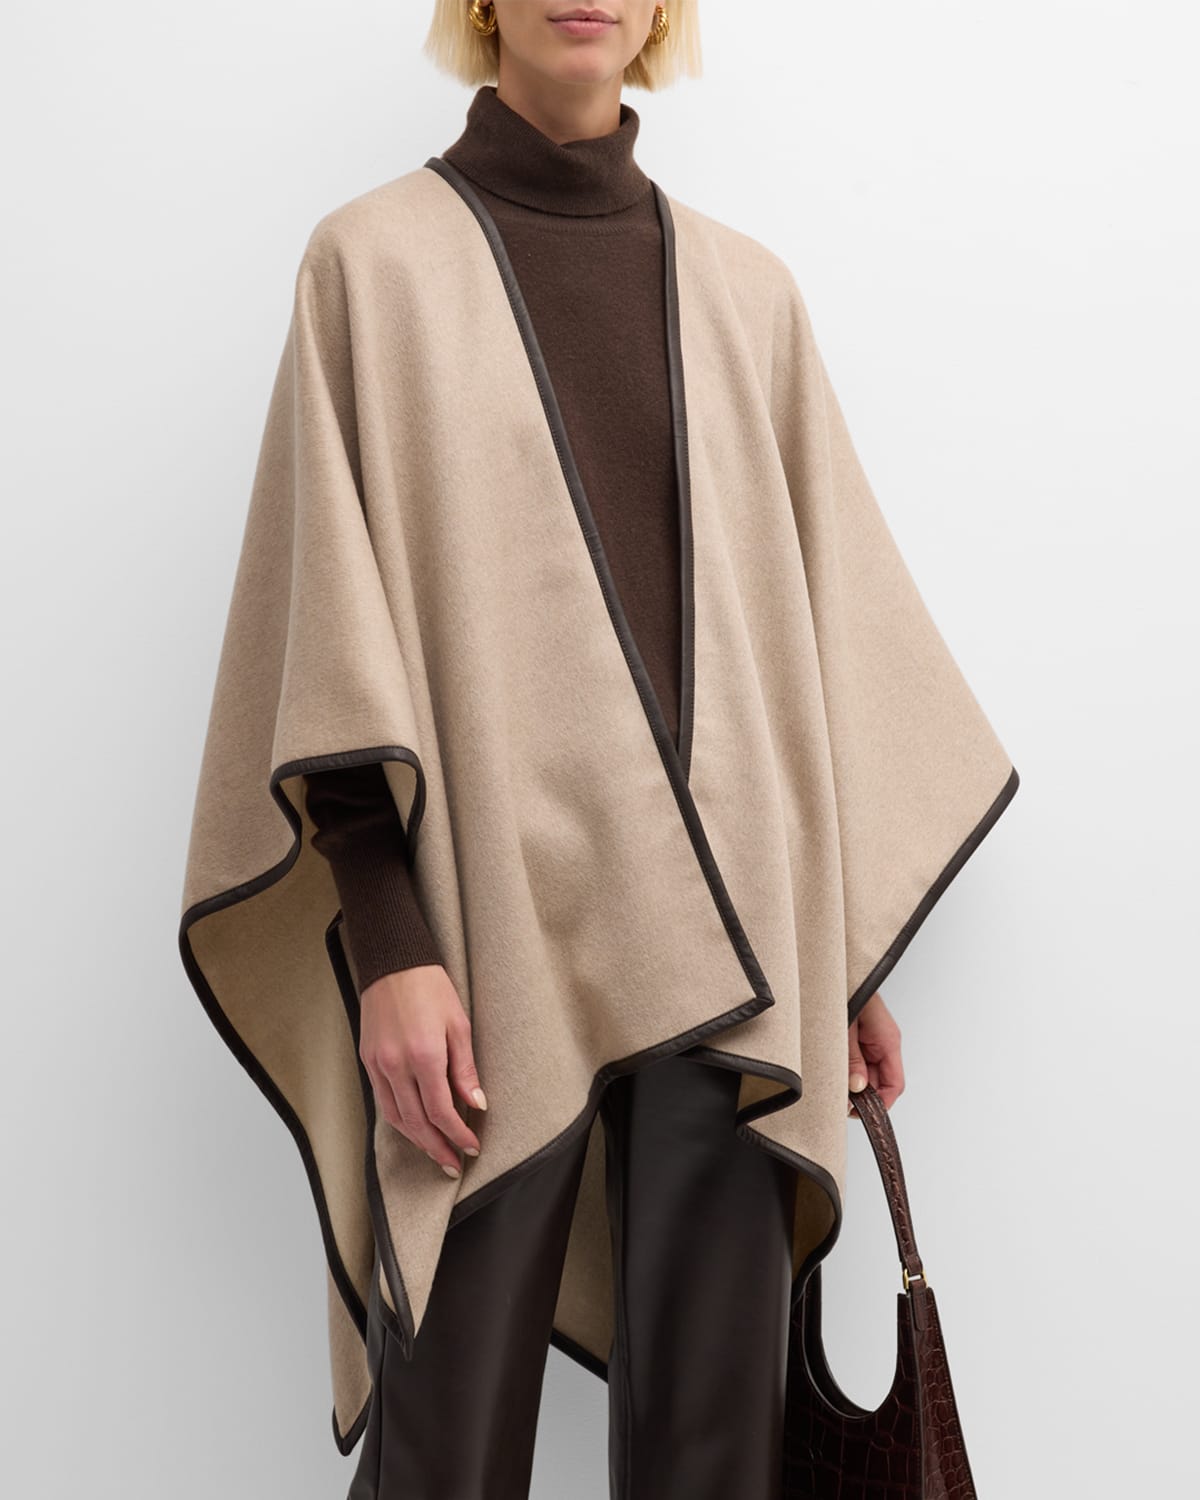 Sofia Cashmere Women's Reversible Leather-trimmed Cashmere Cape In Oat Grey